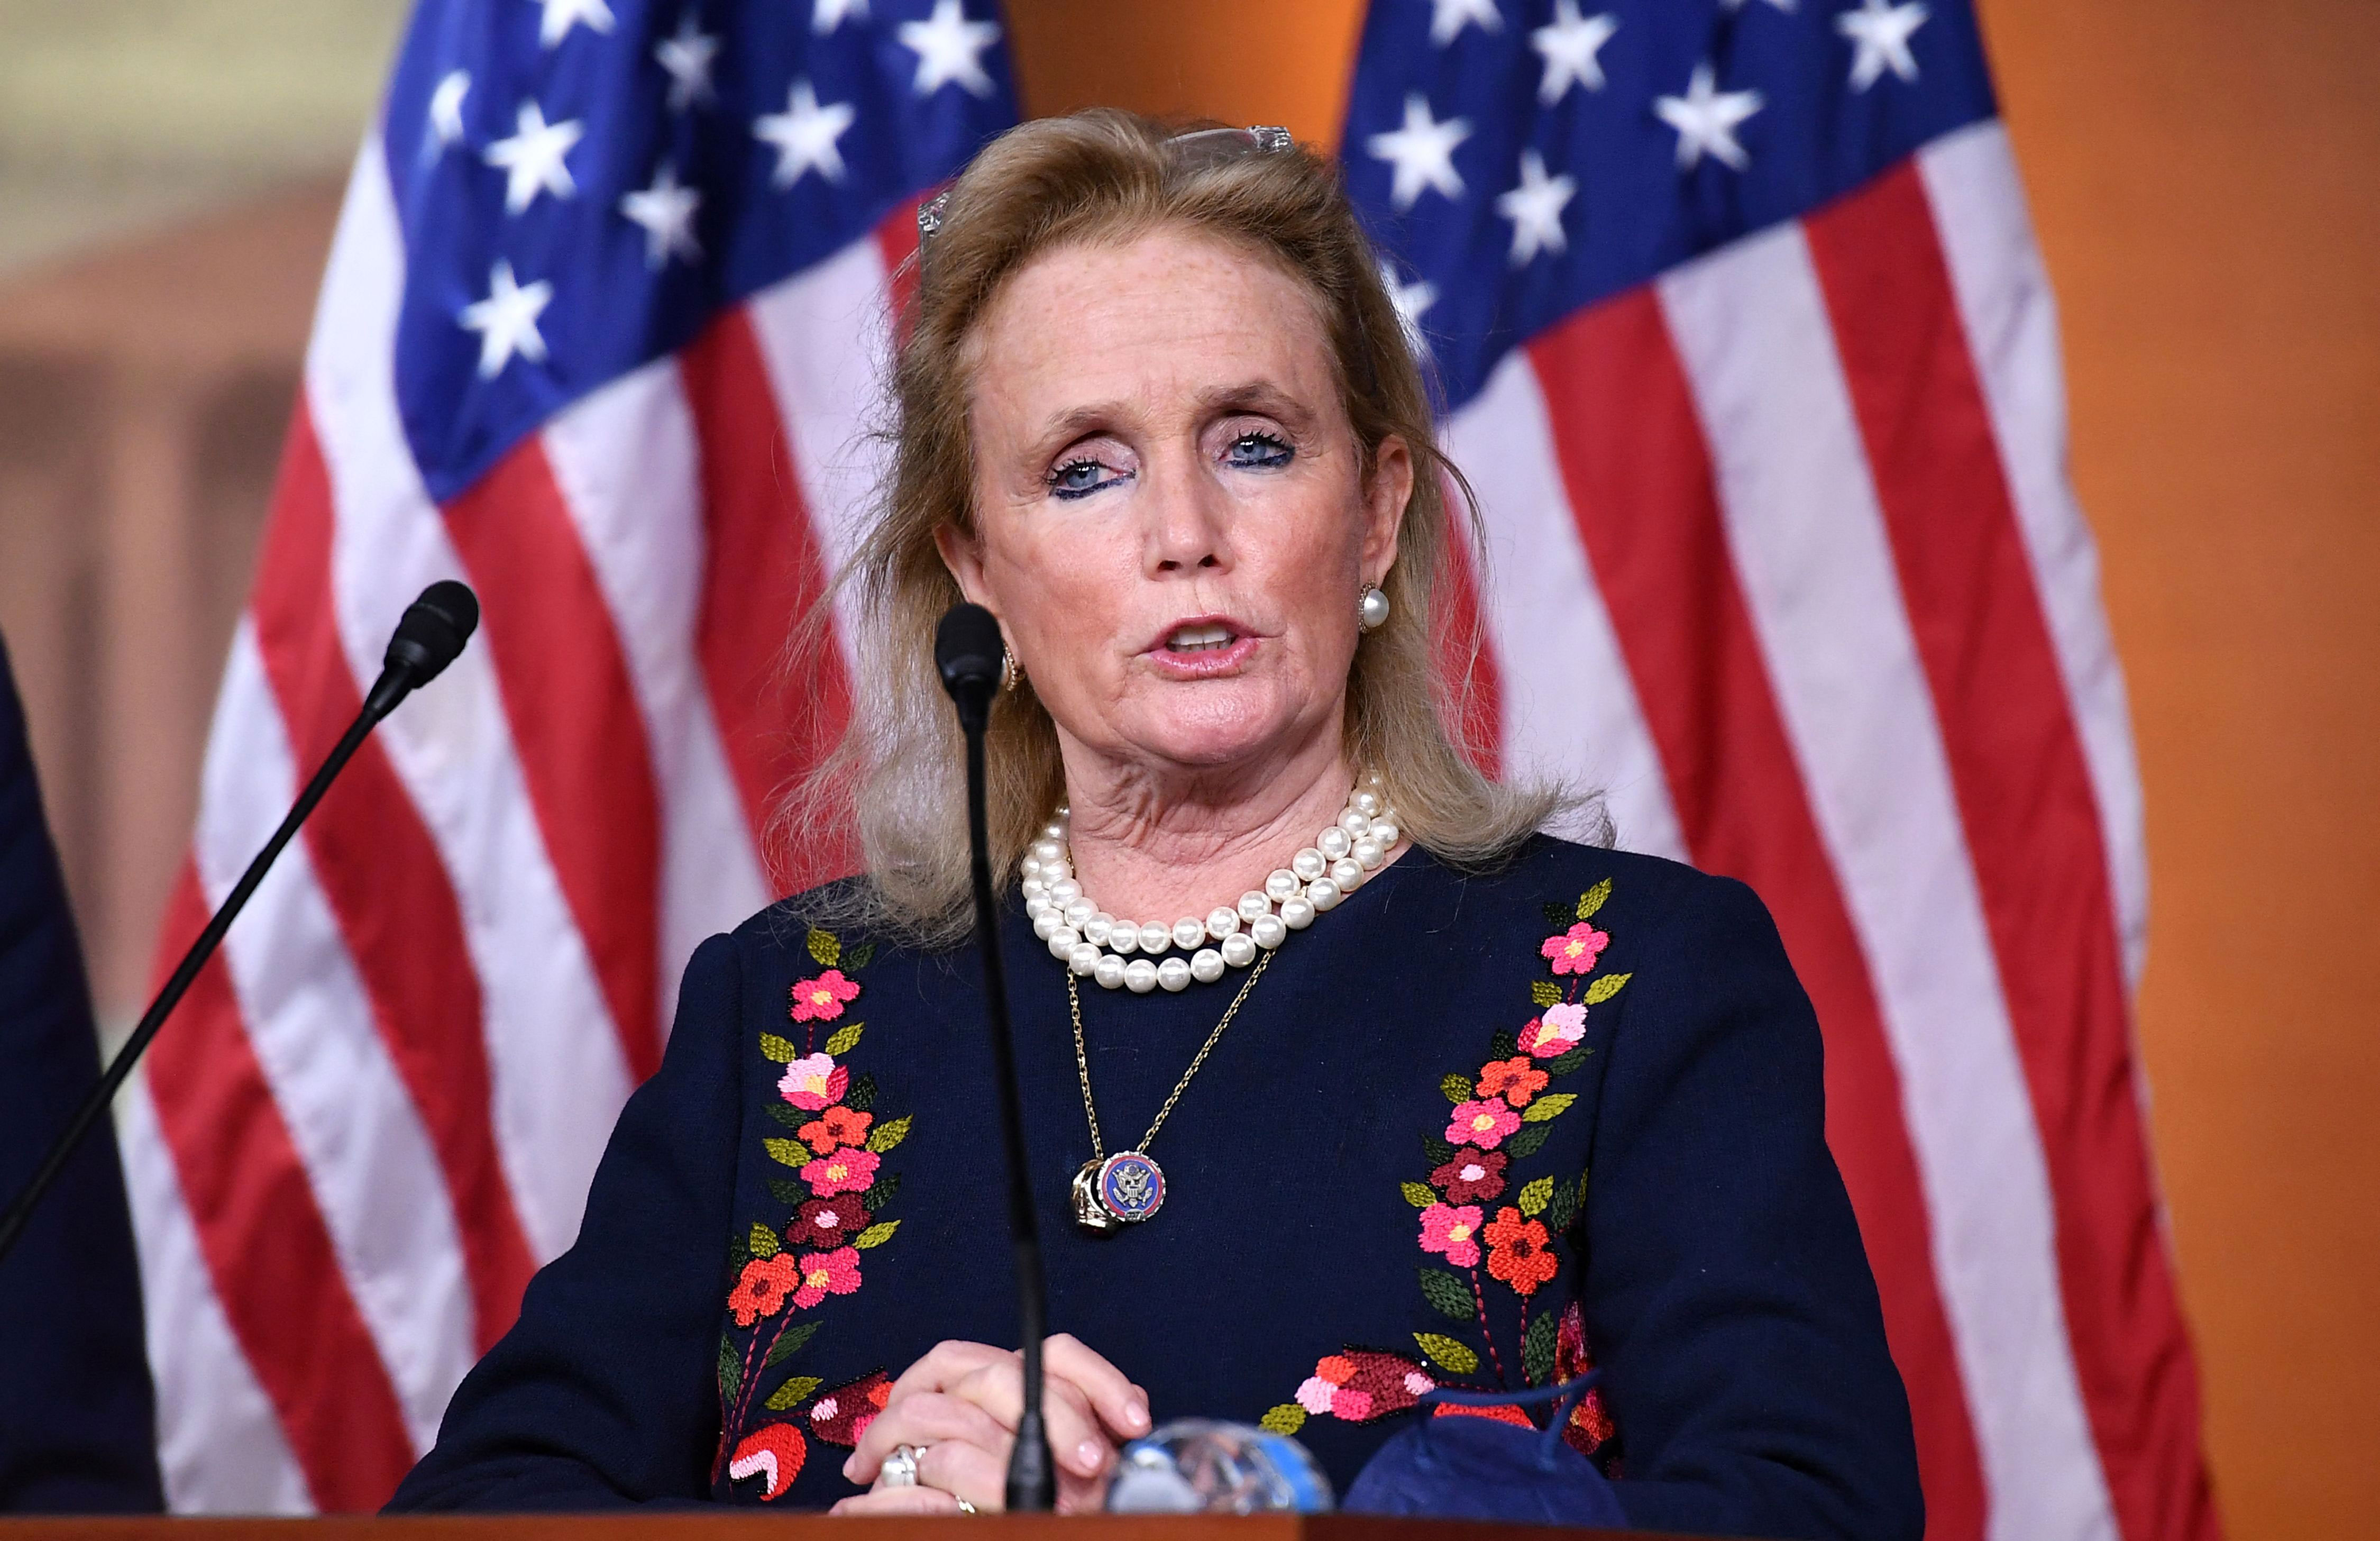 Rep. Debbie Dingell speaks at a press conference at the Capitol in Washington, DC, on November 2.